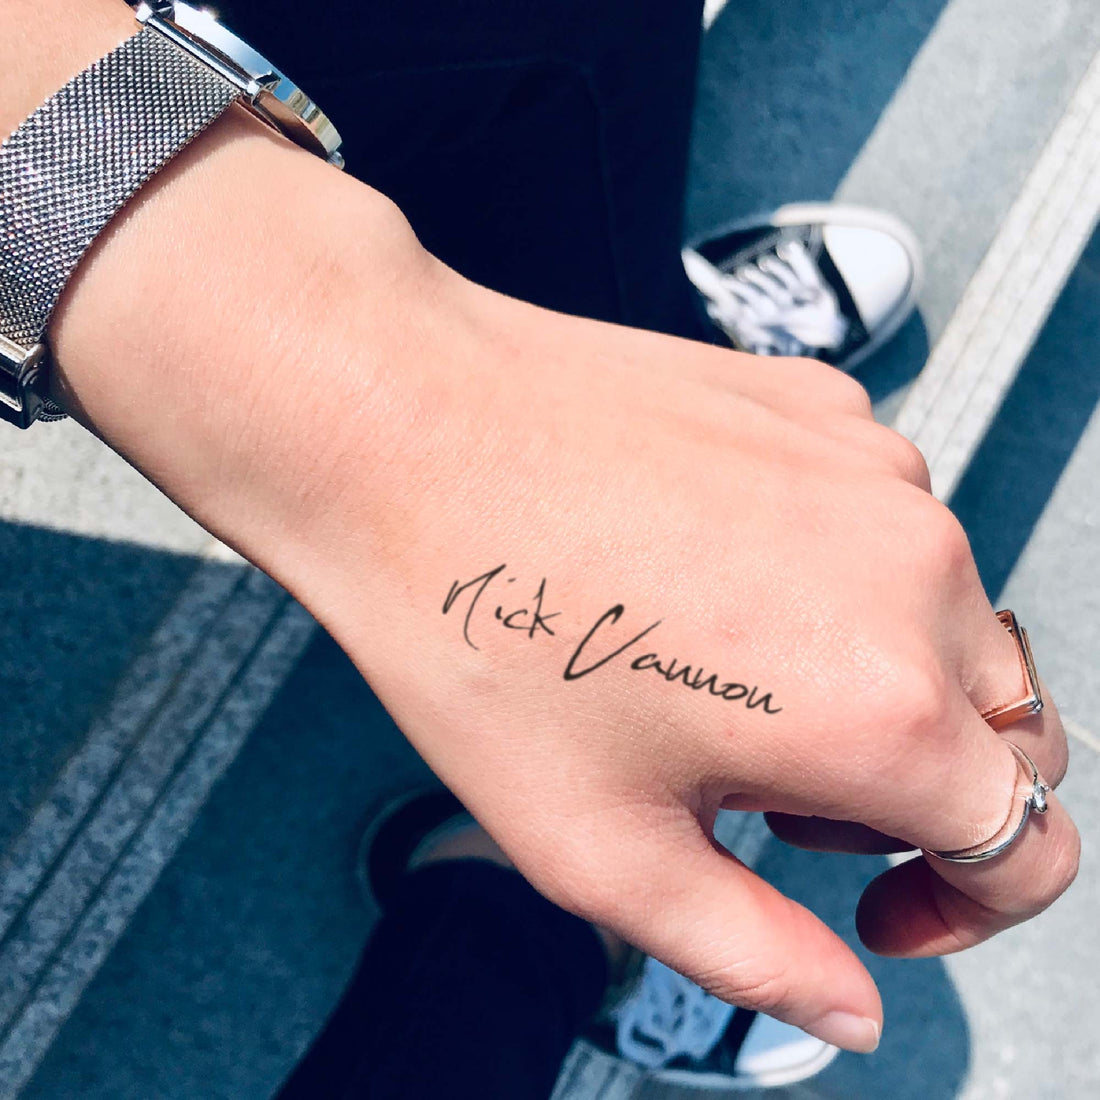 Nick Cannon custom temporary tattoo sticker design idea inspiration meanings removal arm wrist hand words font name signature calligraphy lyrics tour concert outfits merch accessory gift souvenir costumes wear dress up code